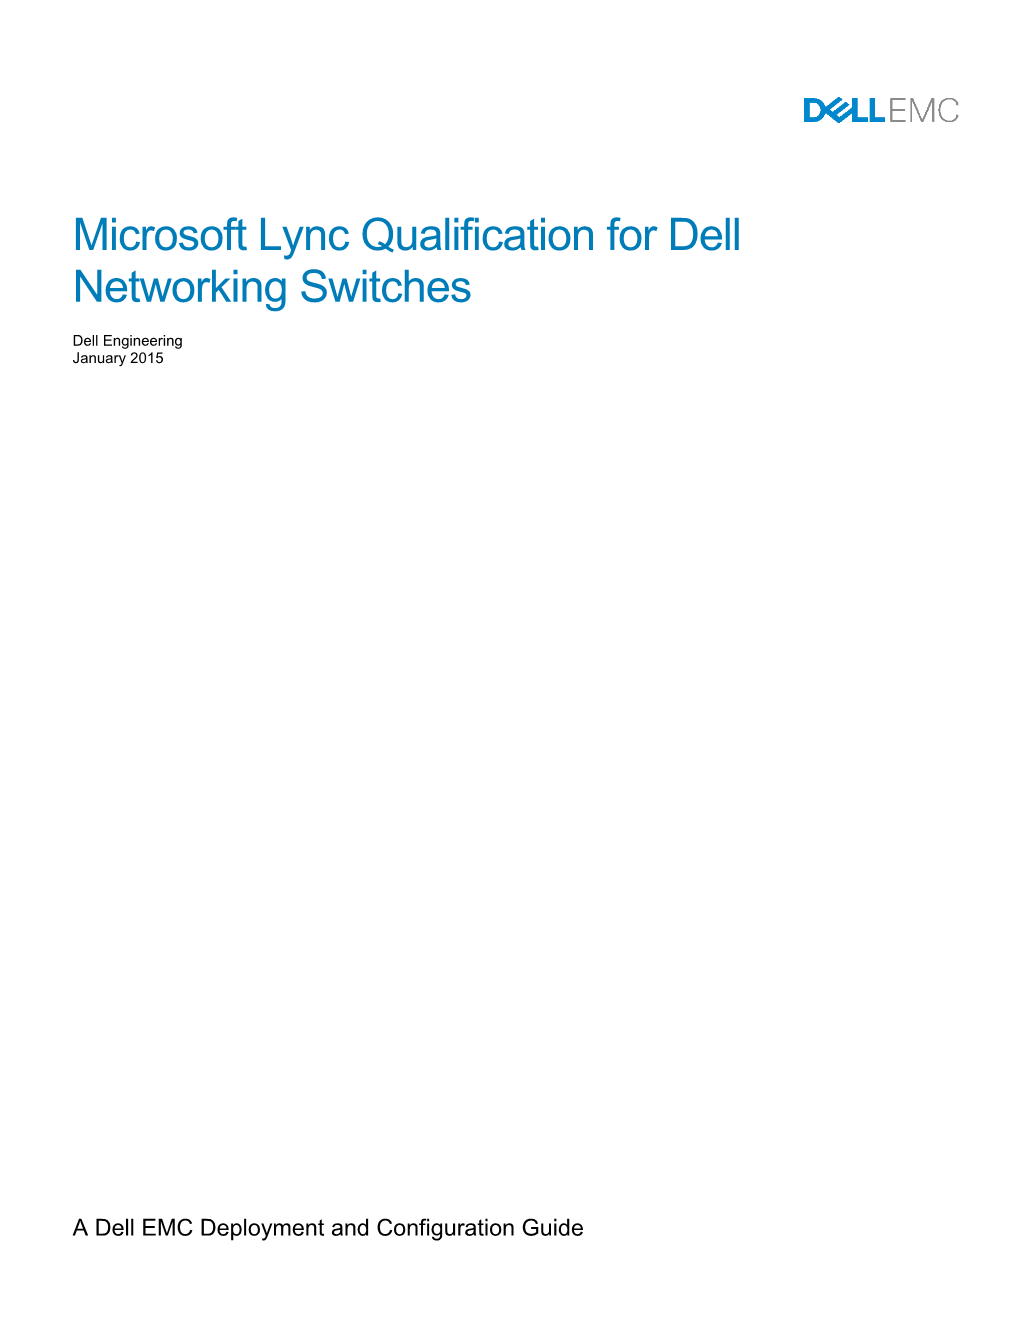 Microsoft Lync Qualification for Dell Networking Switches